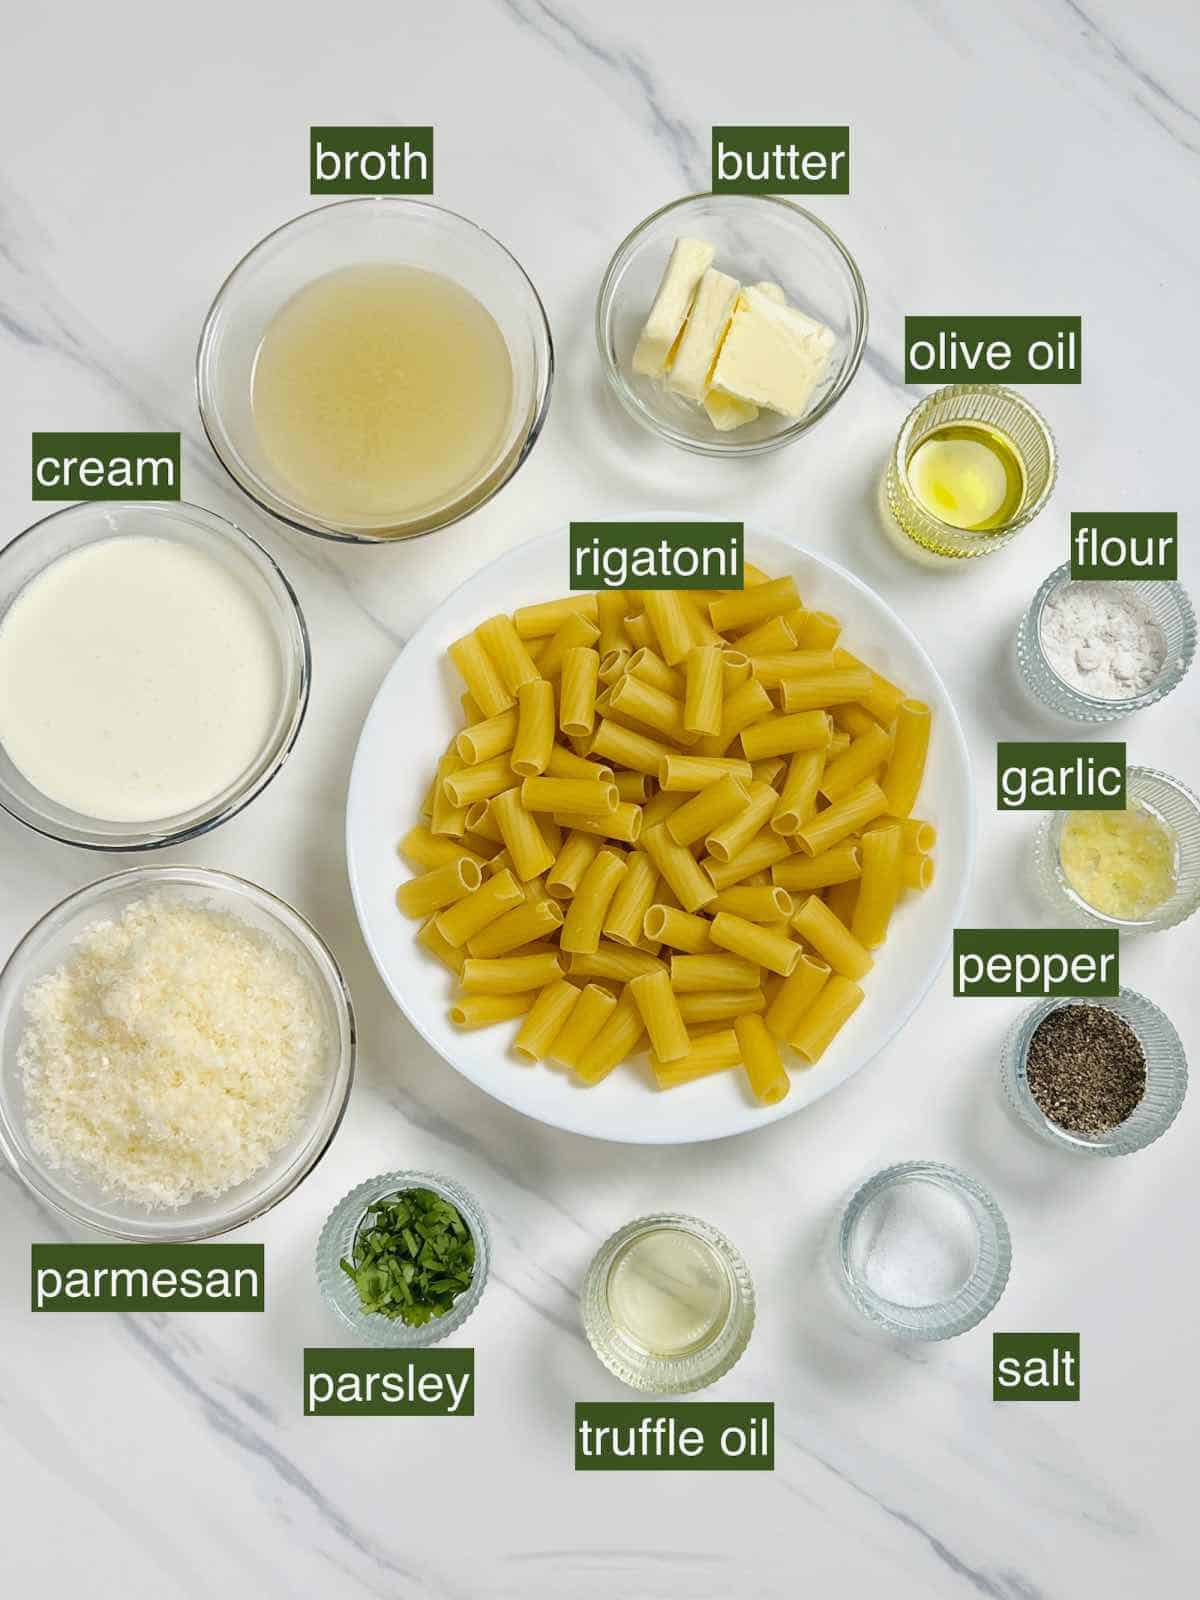 ingredients required for making this creamy truffle rigatoni